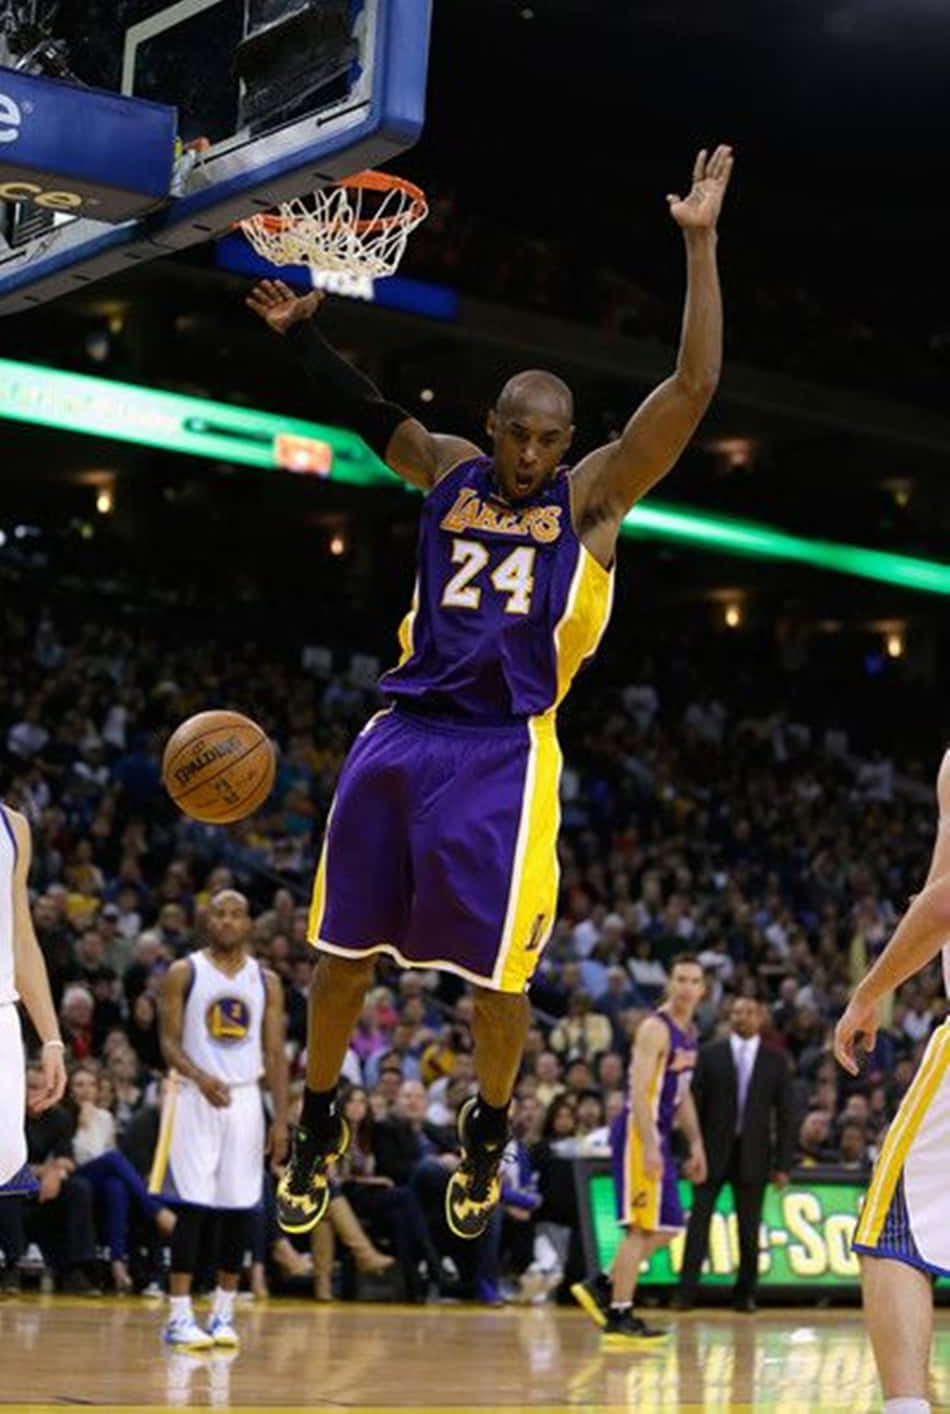 Kobe Bryant putting on an impressive performance as he soars through the air for an emphatic dunk. Wallpaper